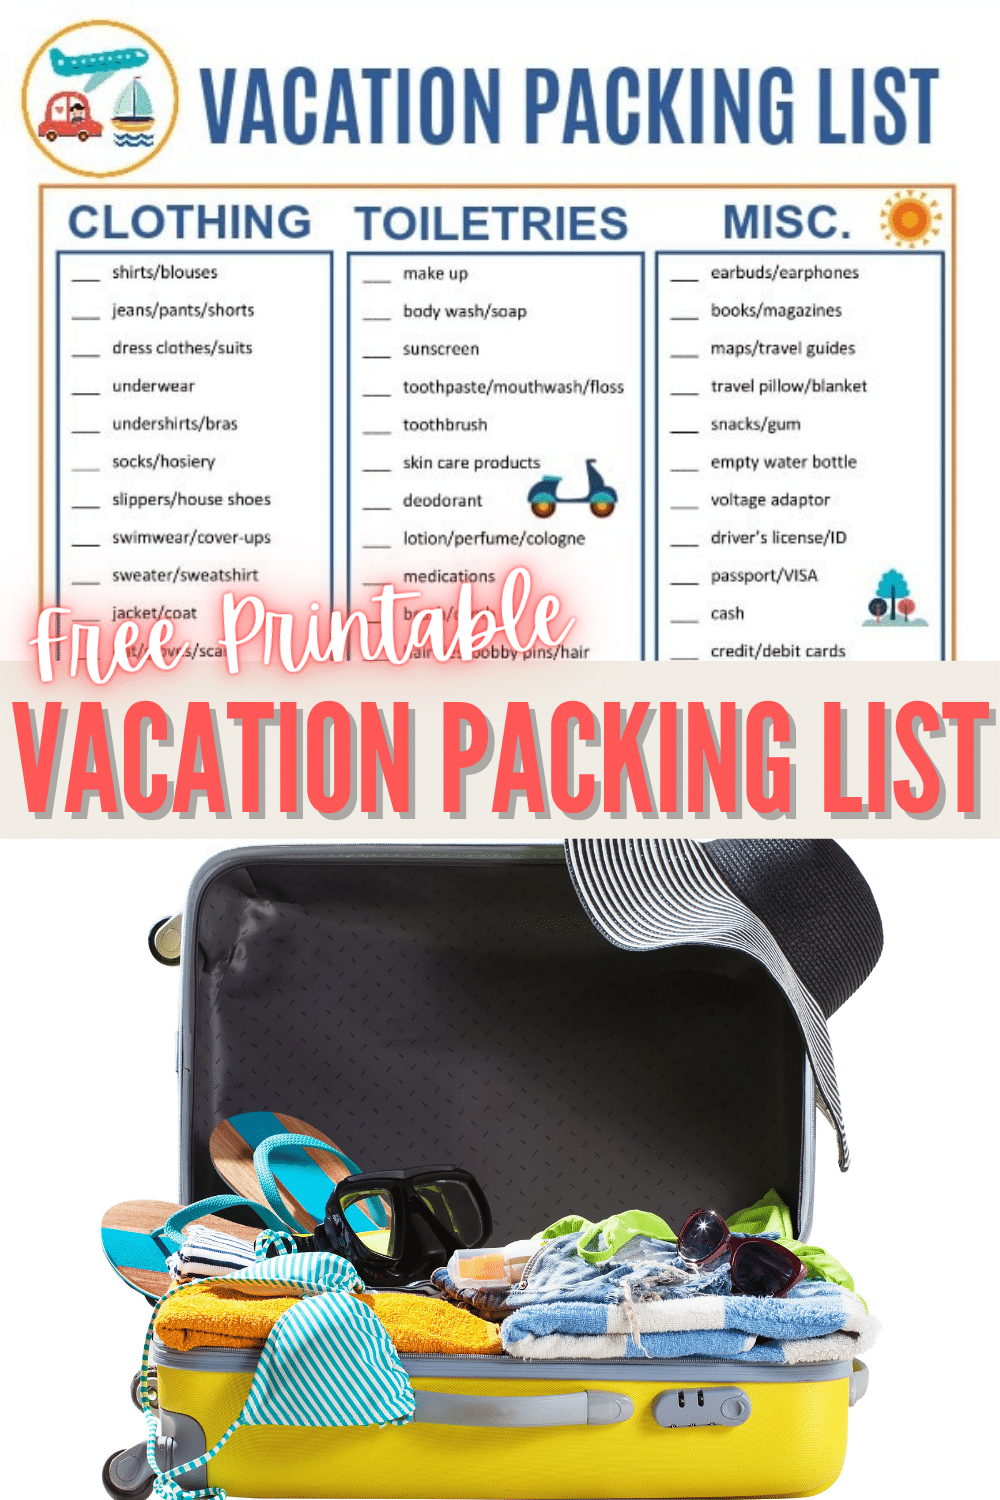 This printable Vacation Packing List will help keep you organized so you can relax while you travel. You won't forget anything important with this list. #printable #travel #packinglist via @wondermomwannab